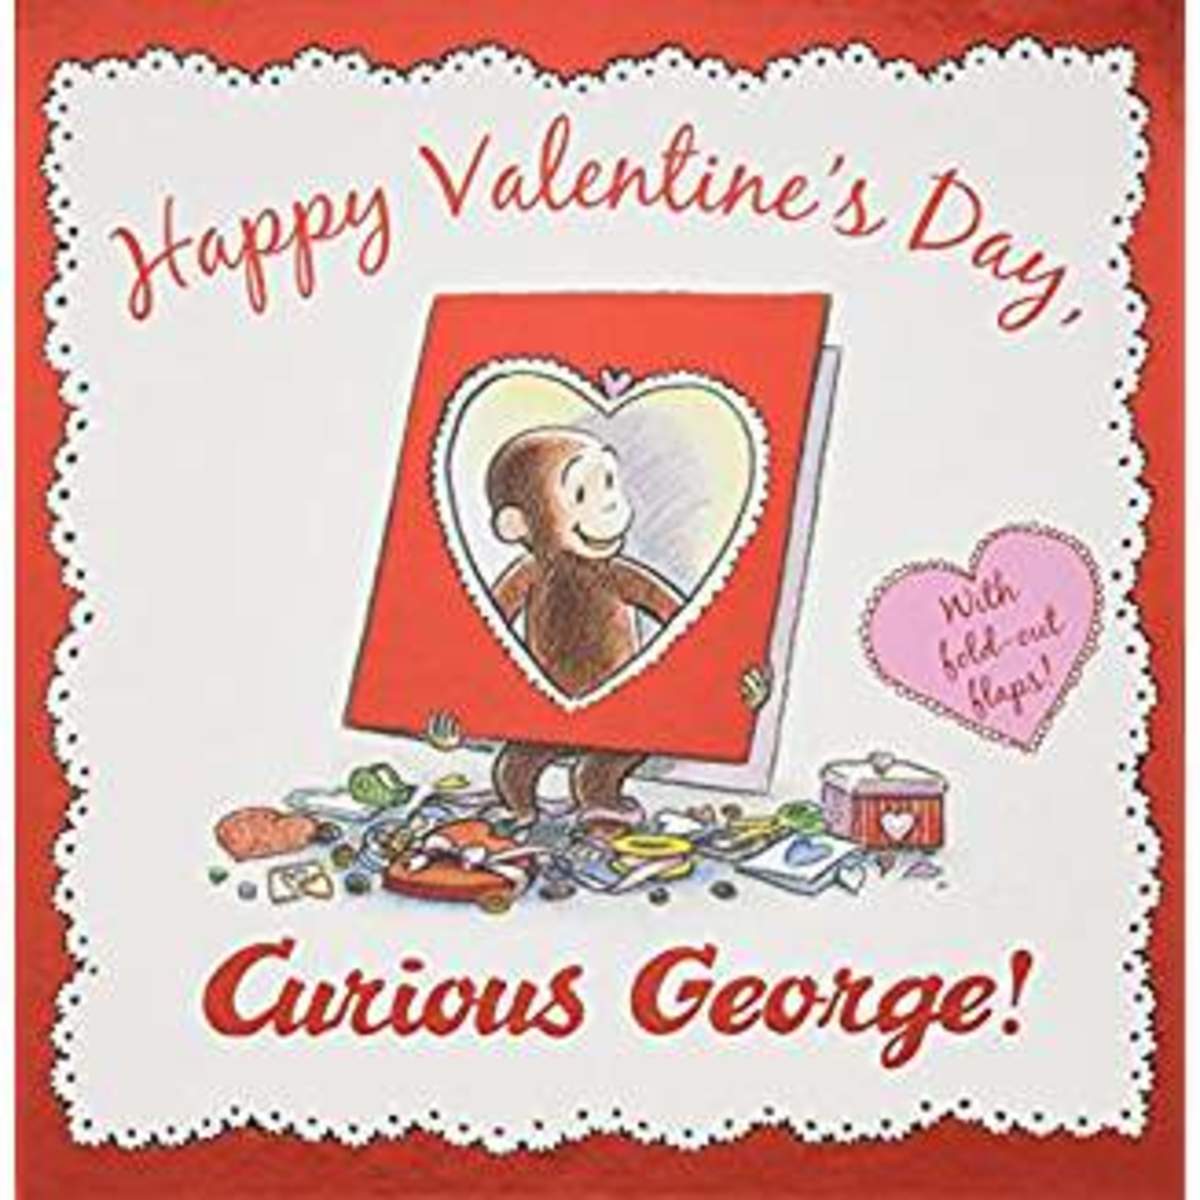 Happy Valentine's Day, Curious George by N. Di Angelo